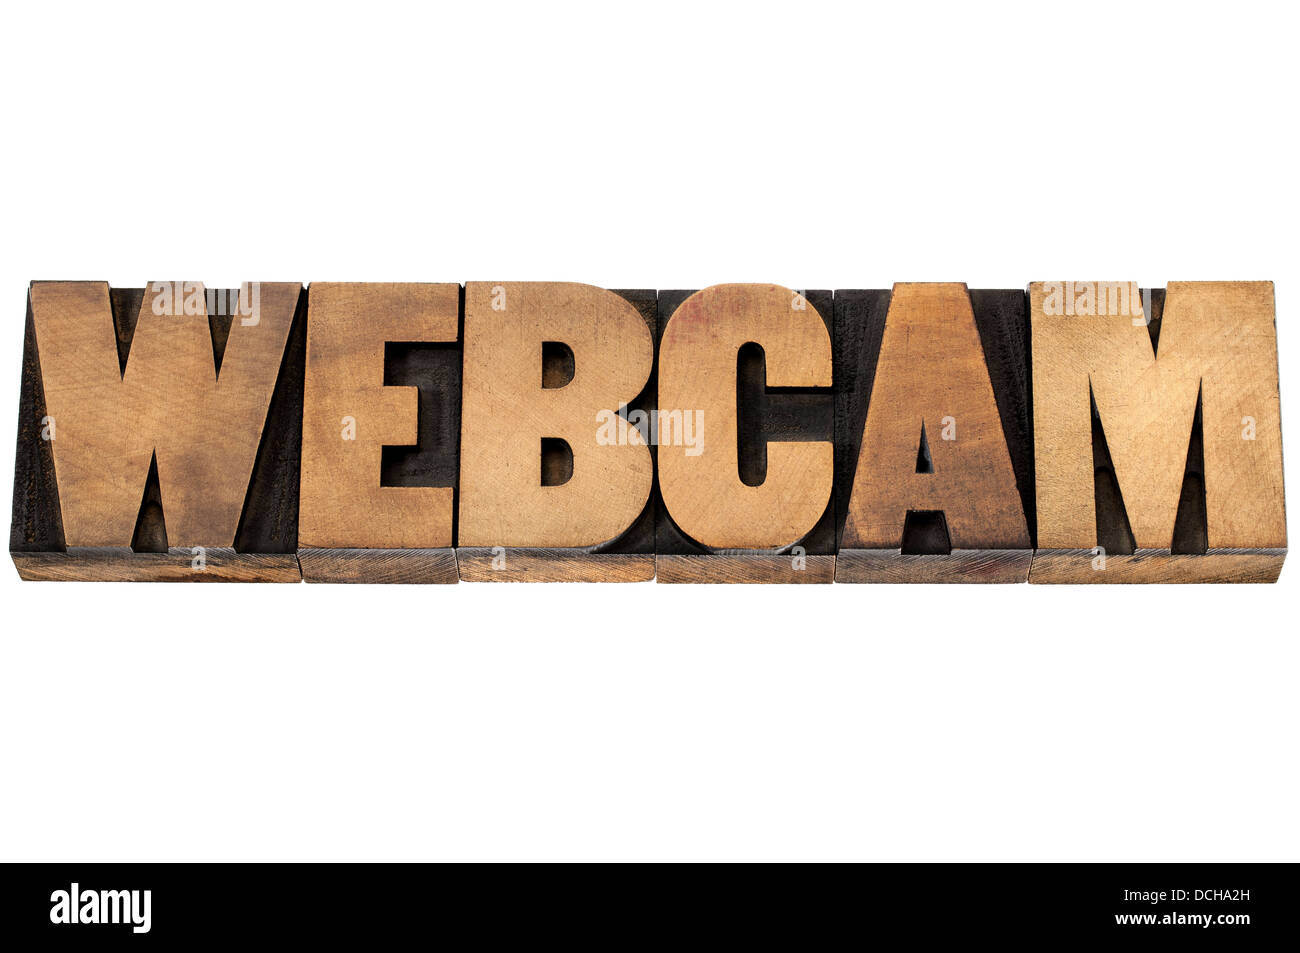 webcam - web video camera - isolated text in letterpress wood type Stock Photo